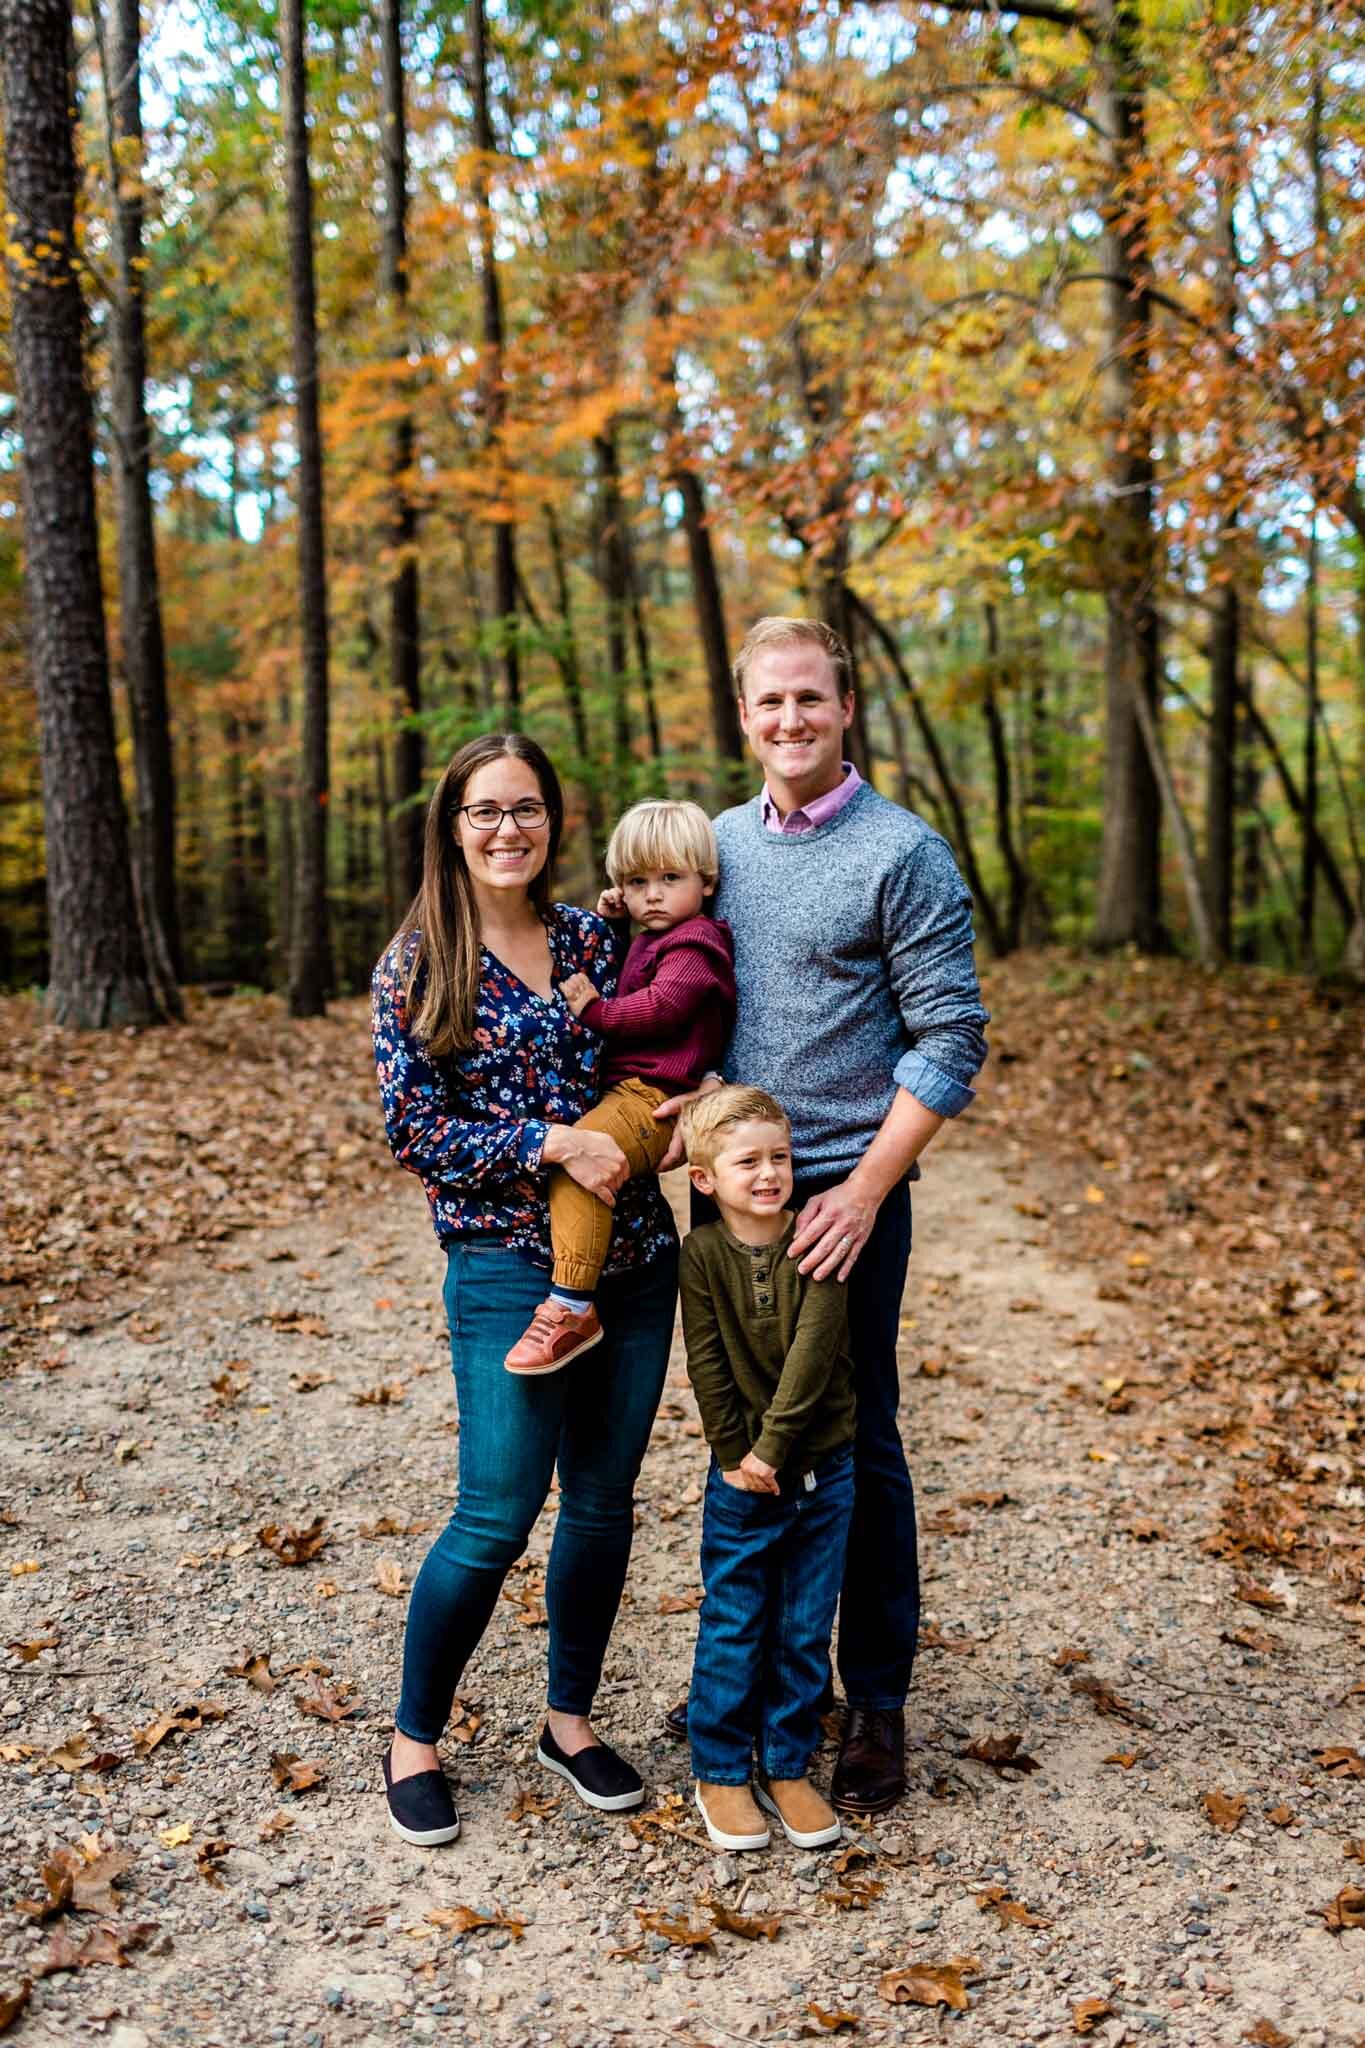 Raleigh Family Photographer at Umstead Park | By G. Lin Photography | Fall family photo with orange leaves in background